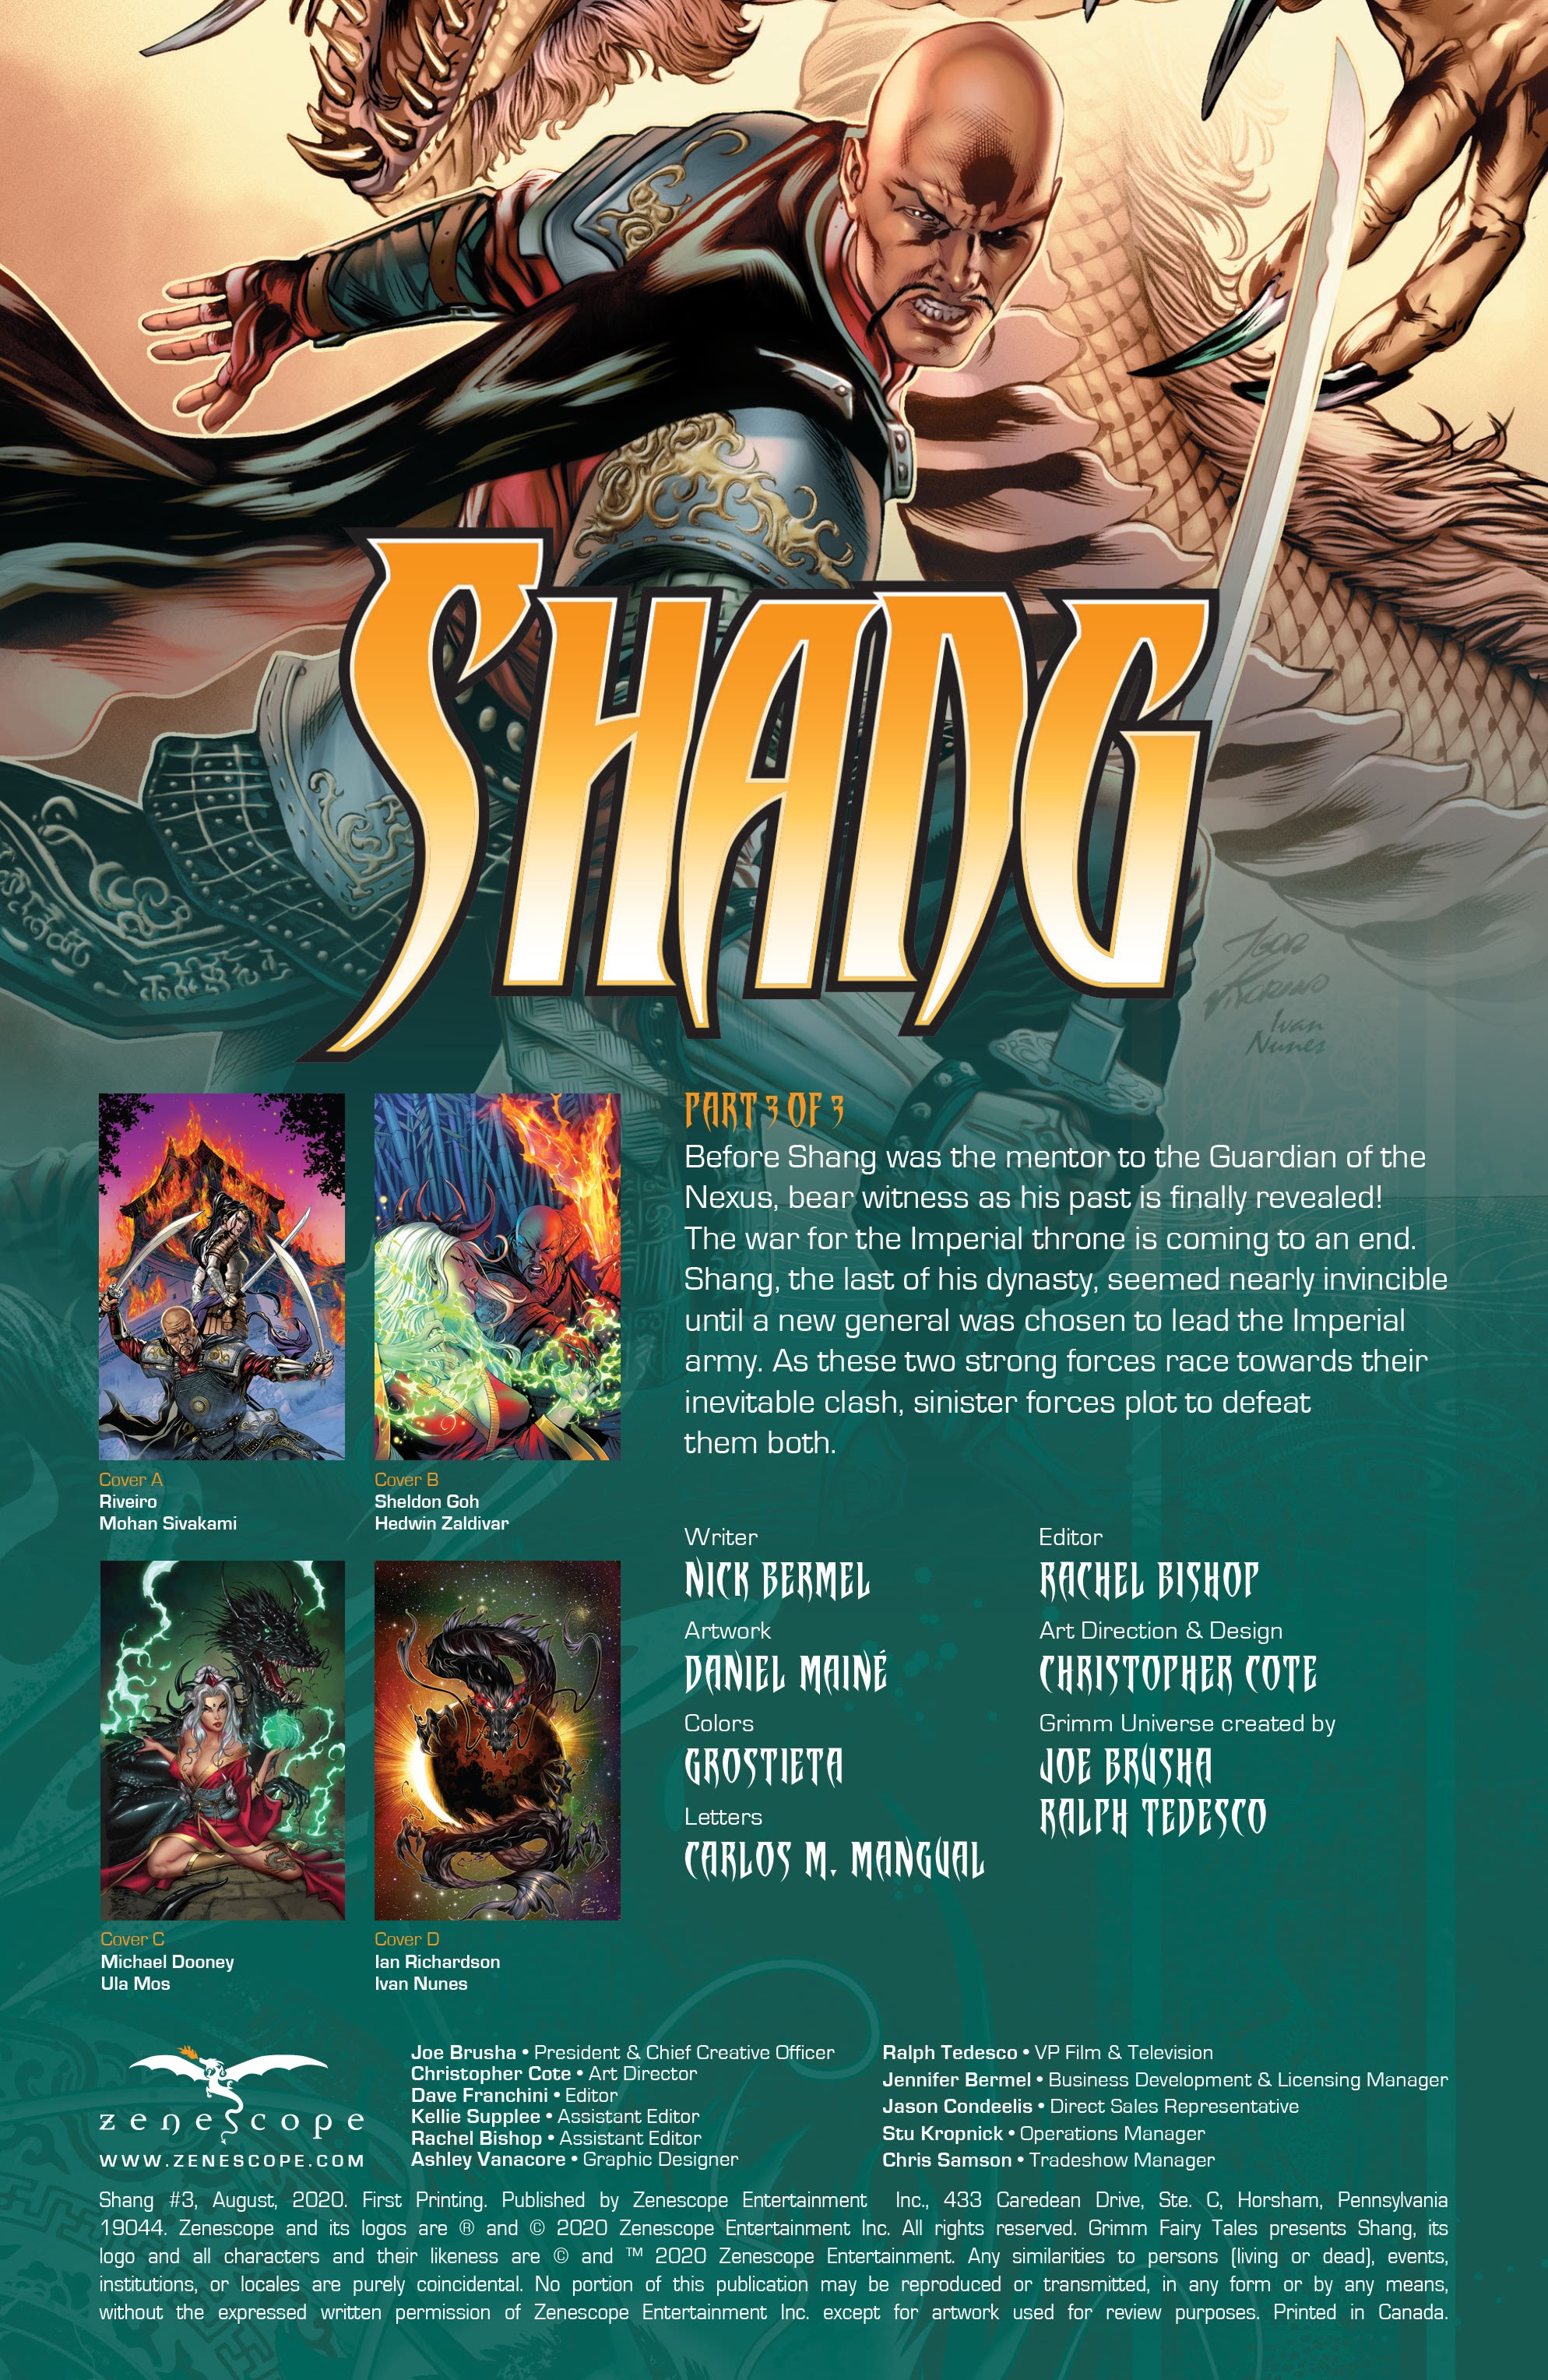 Read online Shang comic -  Issue #3 - 2